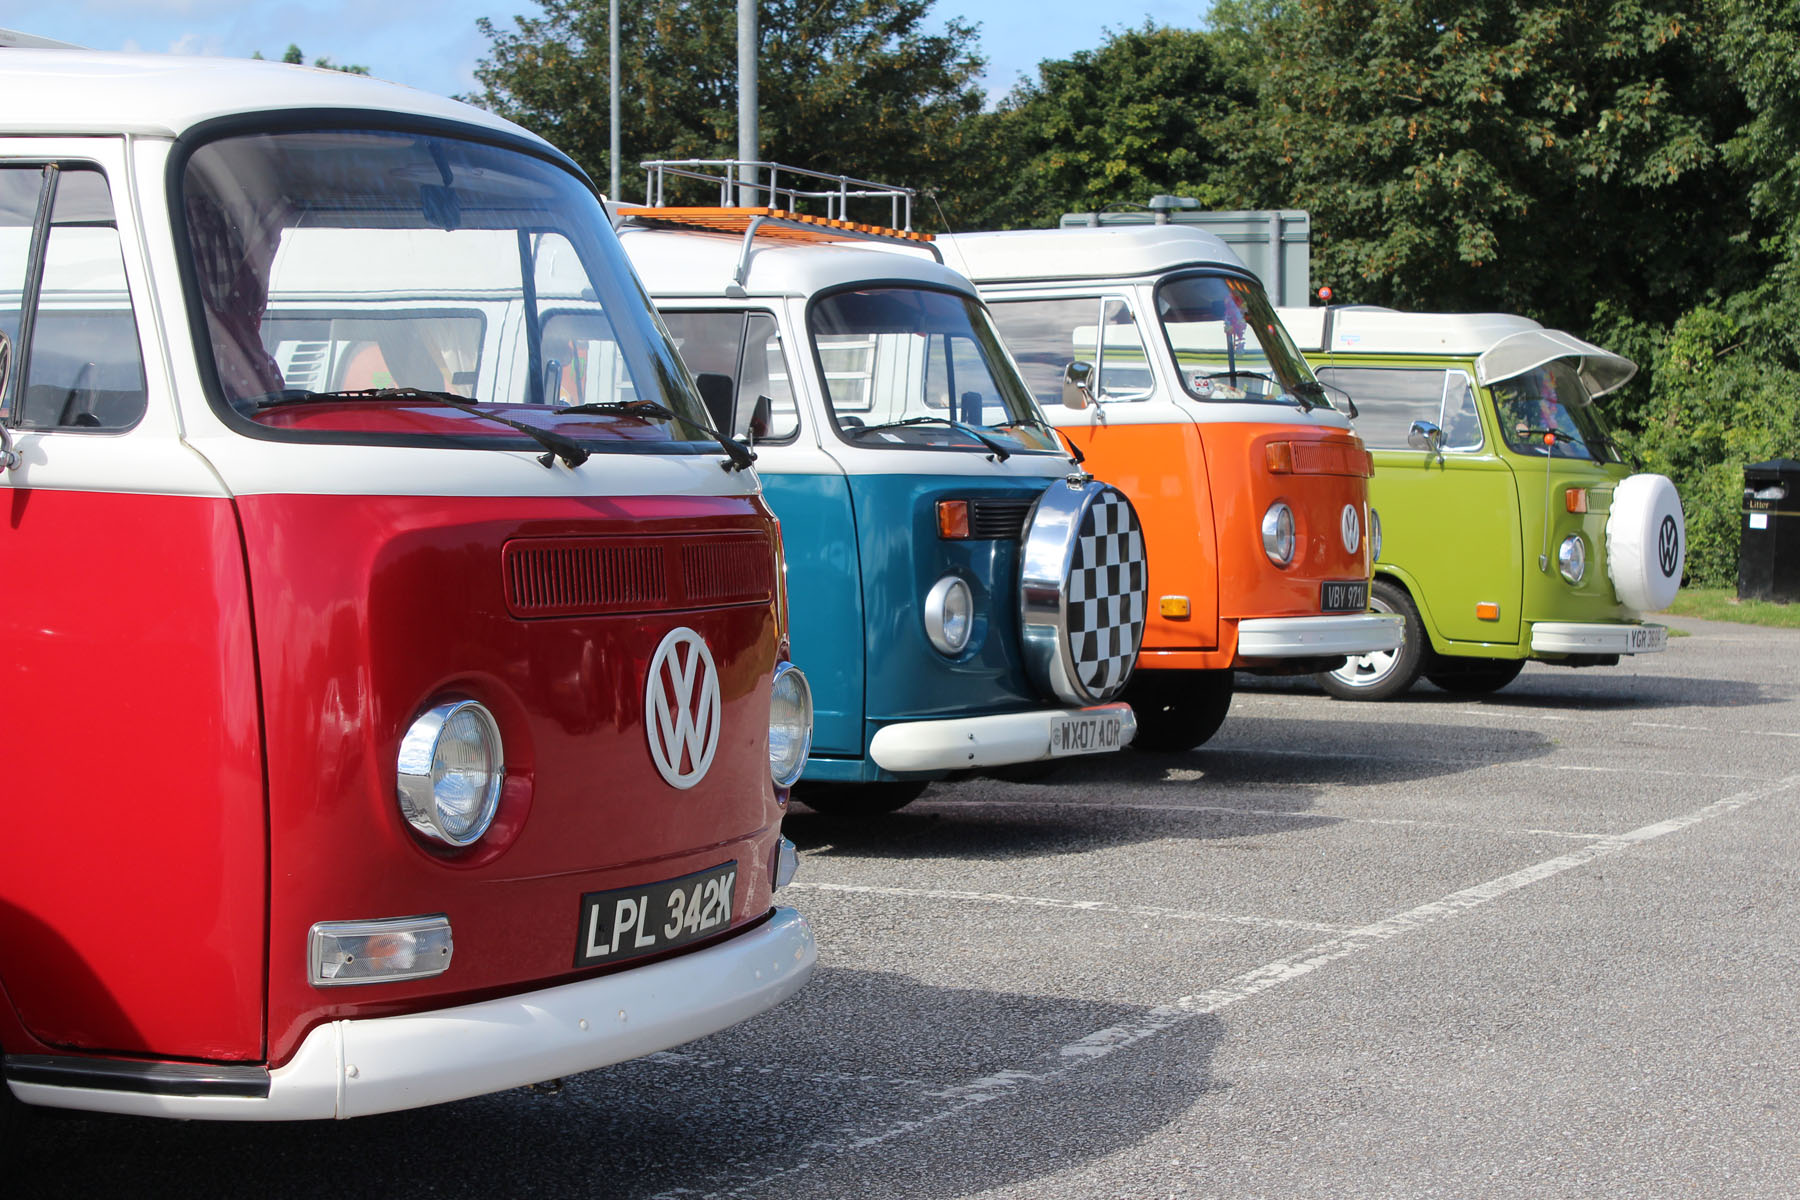 So you want to rent a VW Camper – top tips for glamping in a Classic VW Camper Van